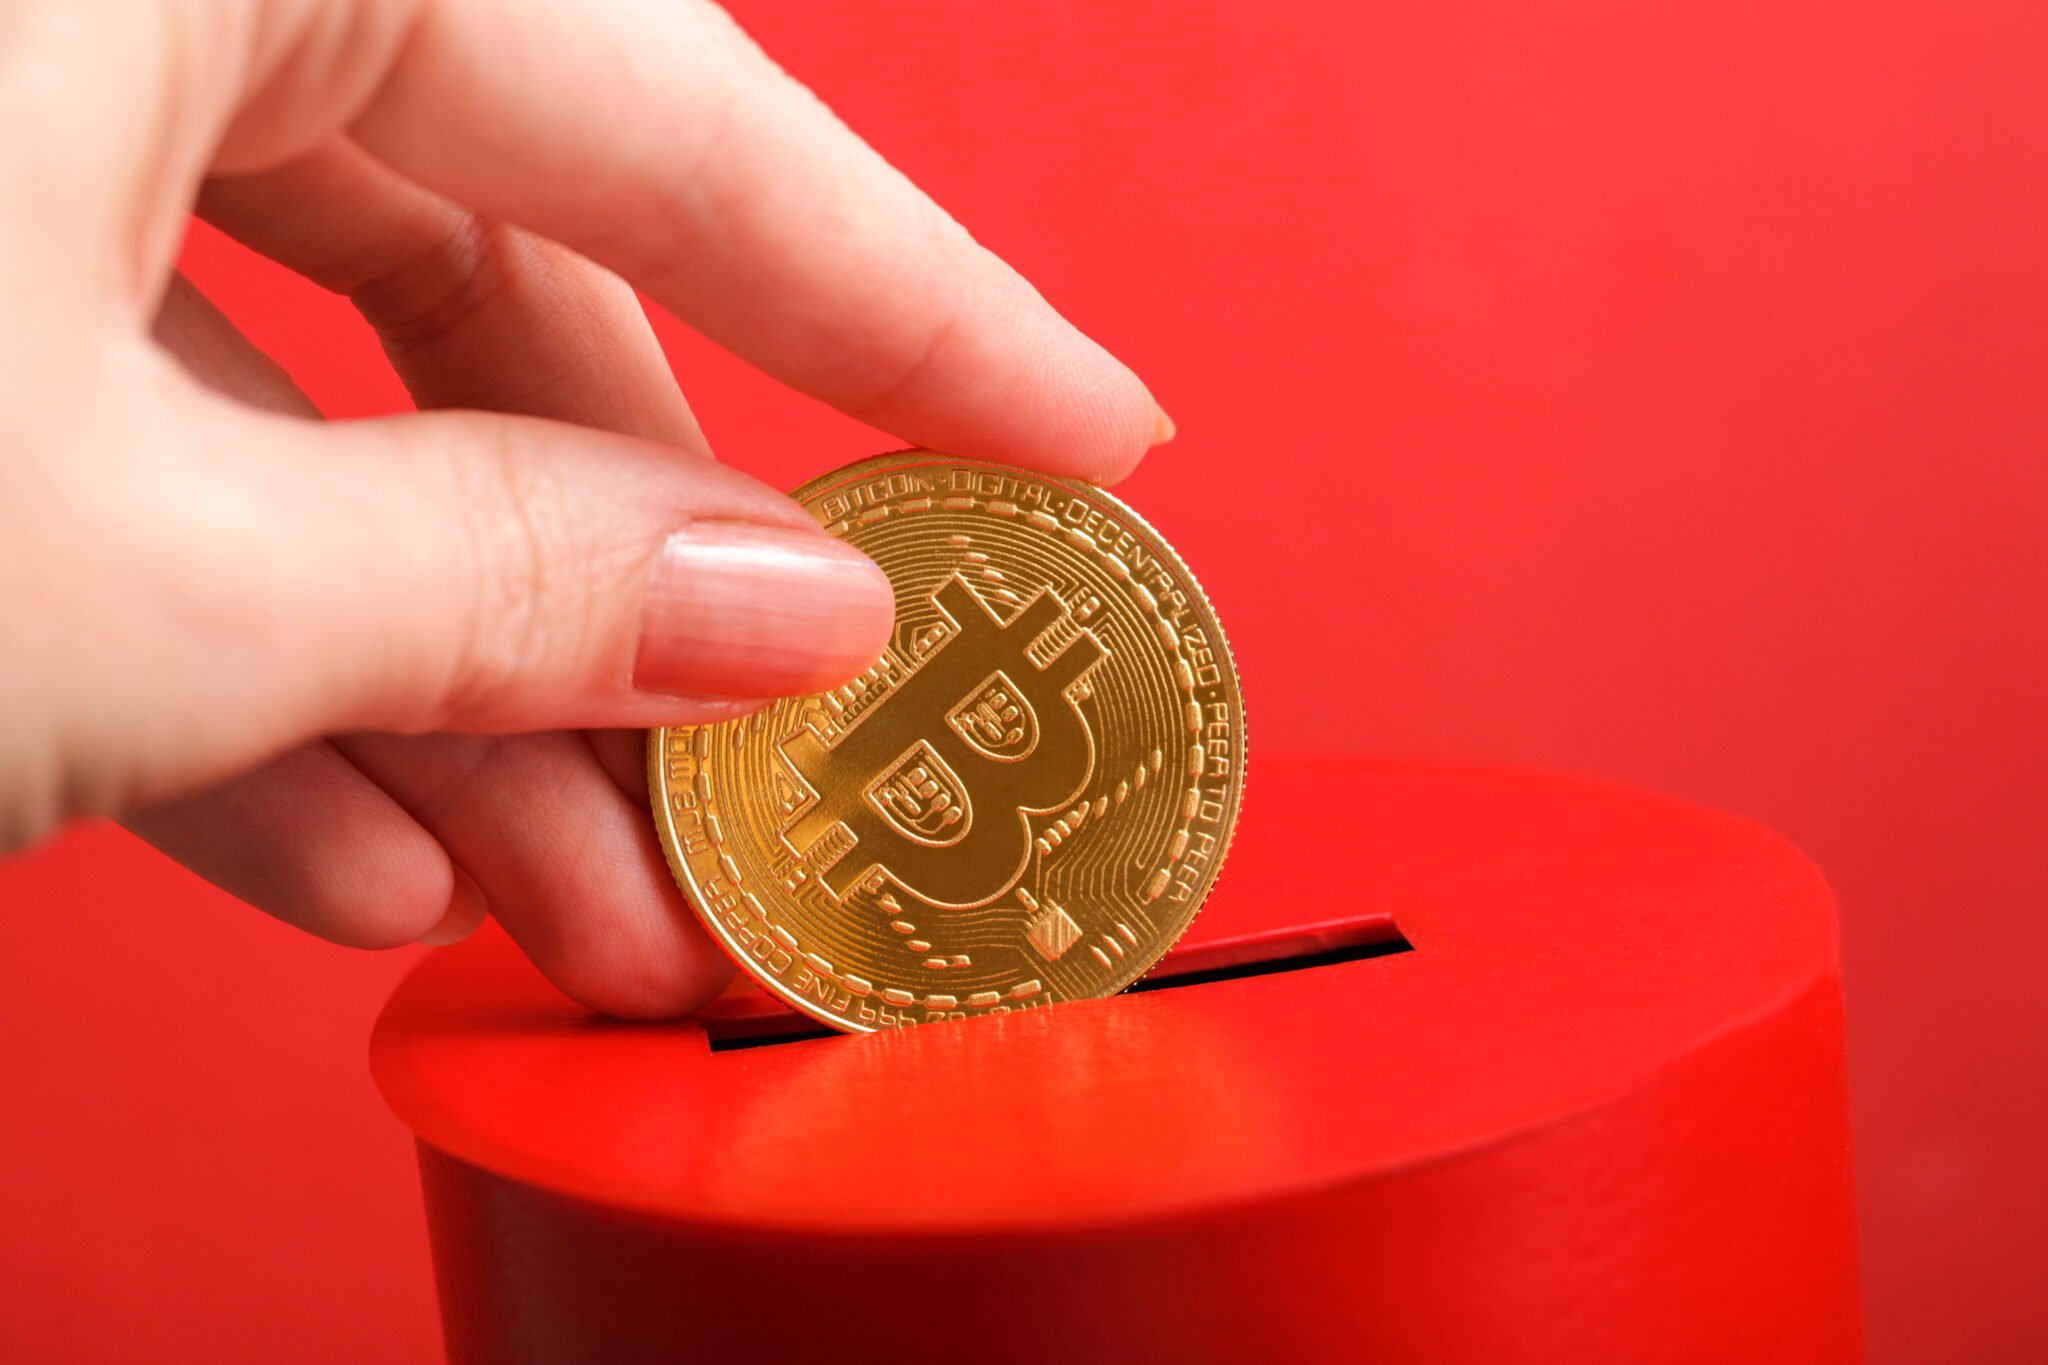 Female hand puts gold coin with bitcoin symbol into slot of red donation box. Concept of donorship, life saving or charity. Concept of sincere devotion to faith. Close-up shot